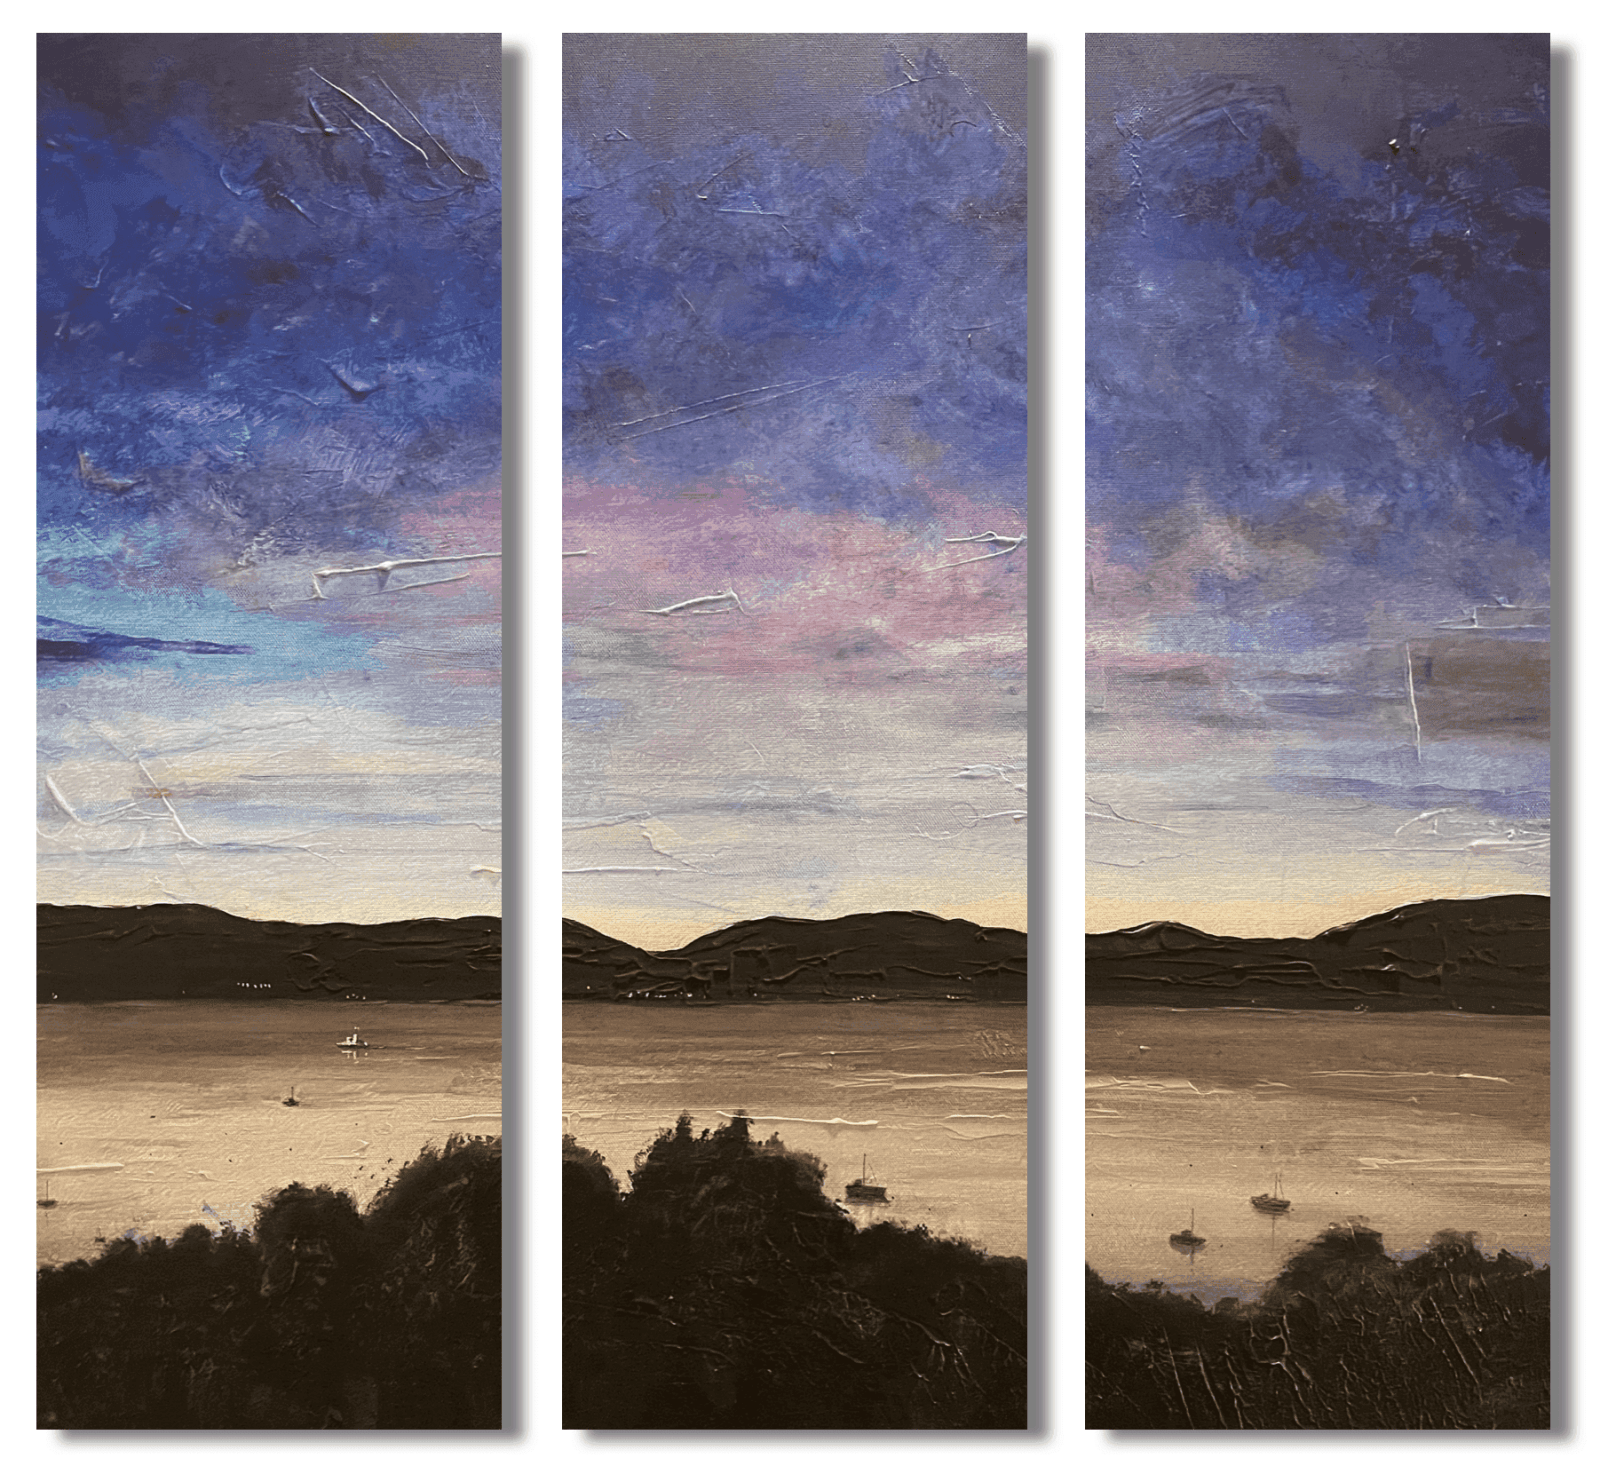 River Clyde Twilight Painting Signed Fine Art Triptych Canvas-Statement Wall Art-River Clyde Art Gallery-Paintings, Prints, Homeware, Art Gifts From Scotland By Scottish Artist Kevin Hunter